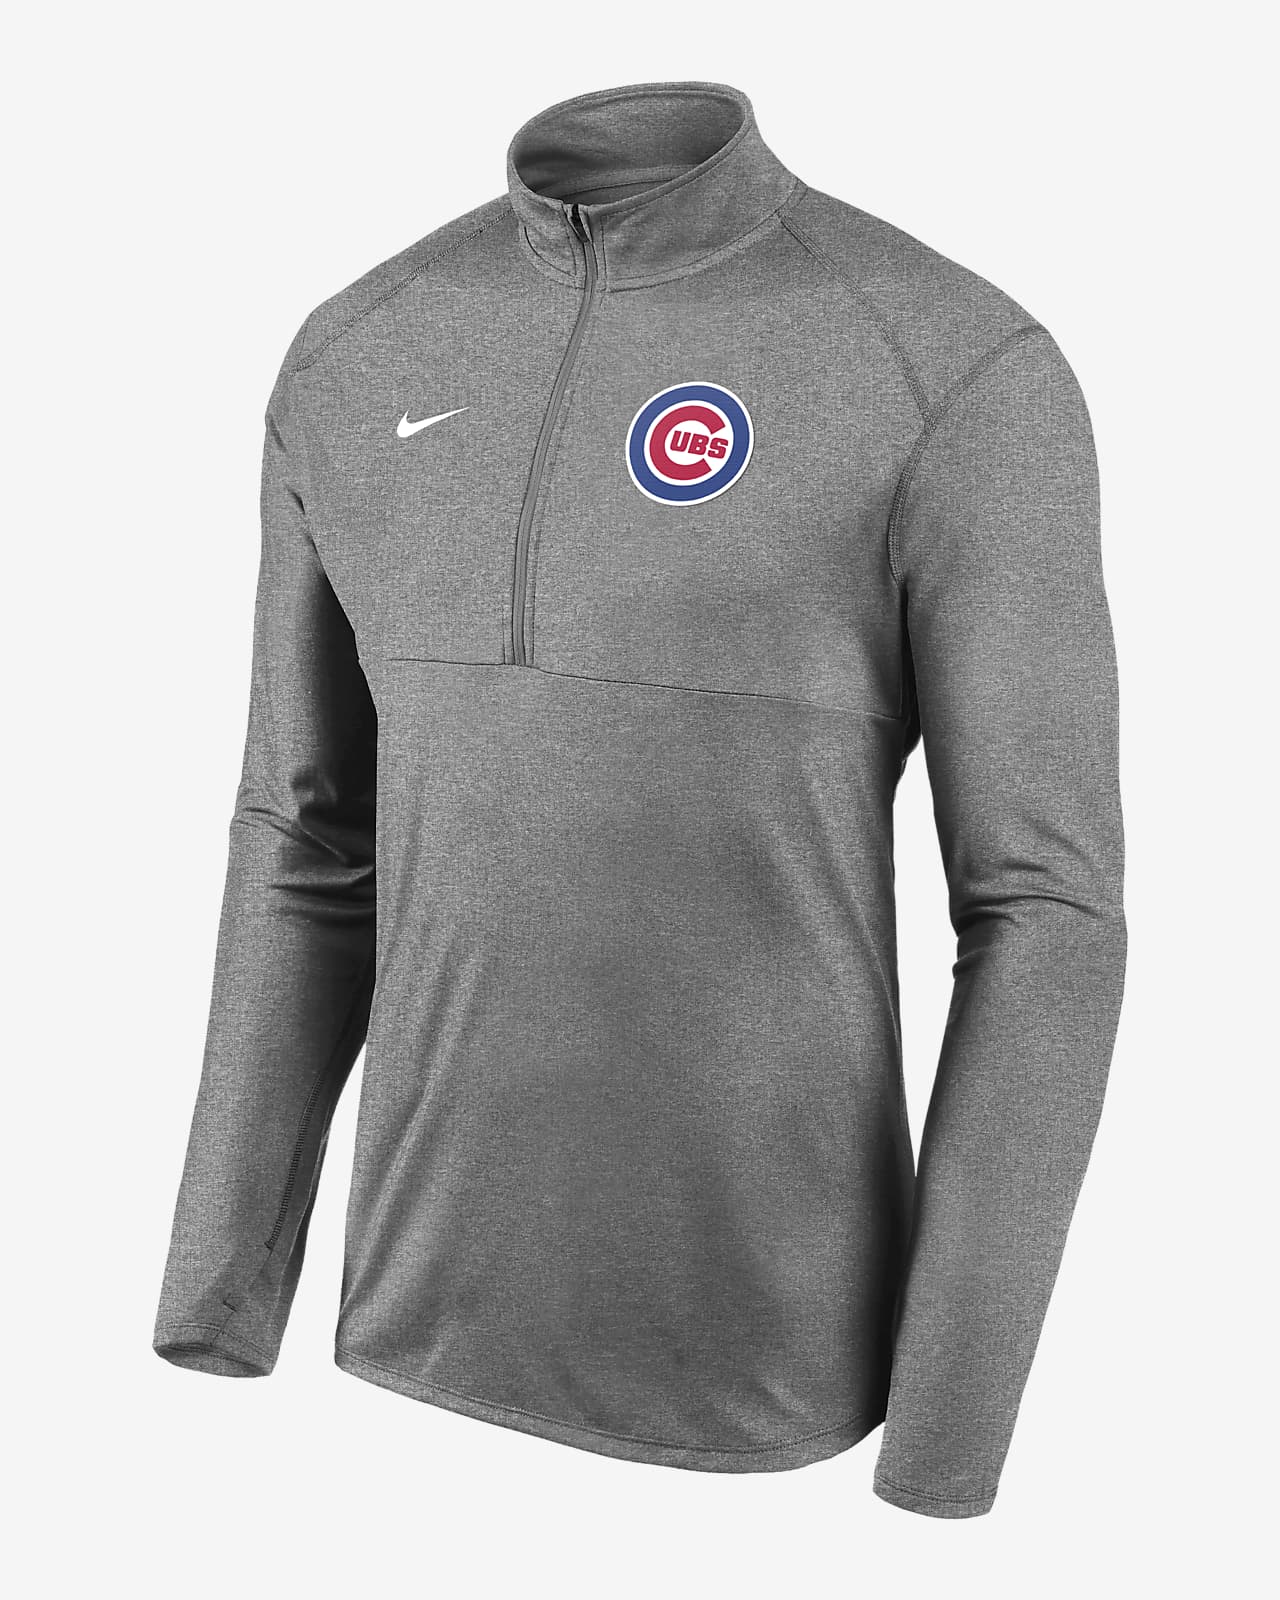 Nike Dri-FIT Element Performance (MLB Chicago Cubs) Men's 1/2-Zip Pullover.